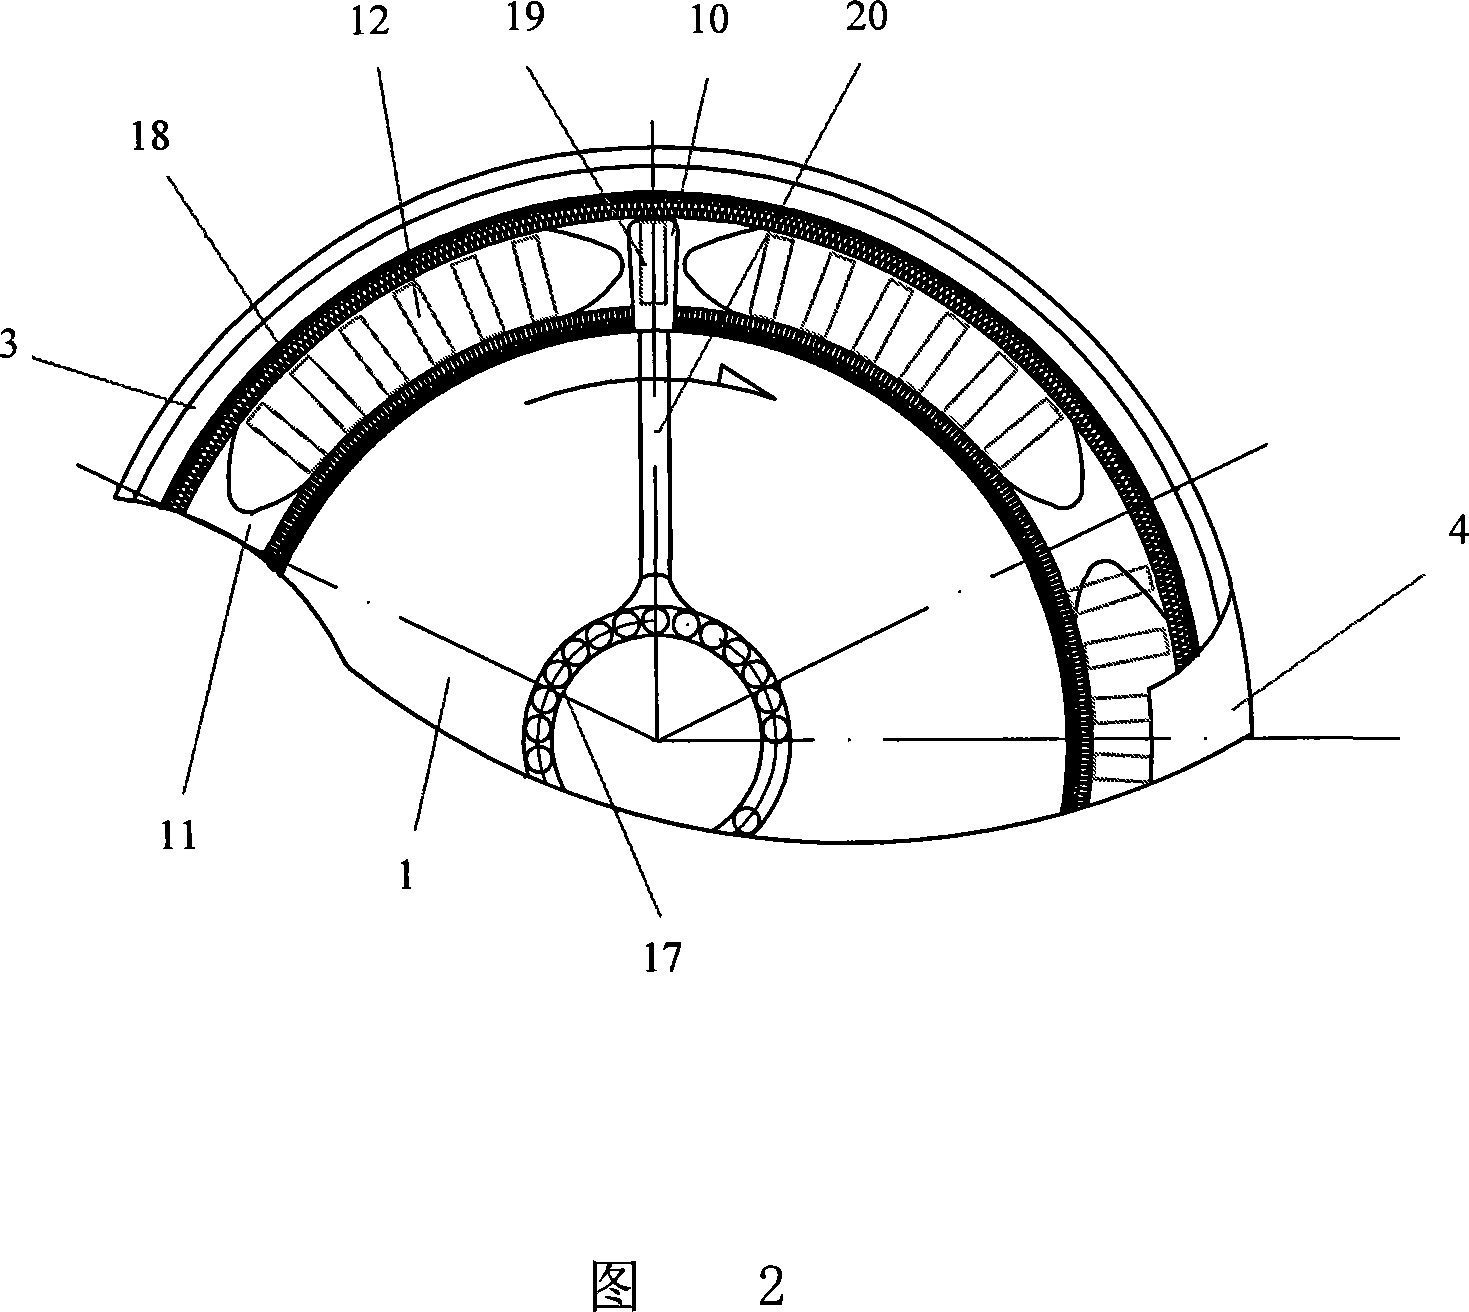 Direct-driving circular loom magnetic suspension shuttle device